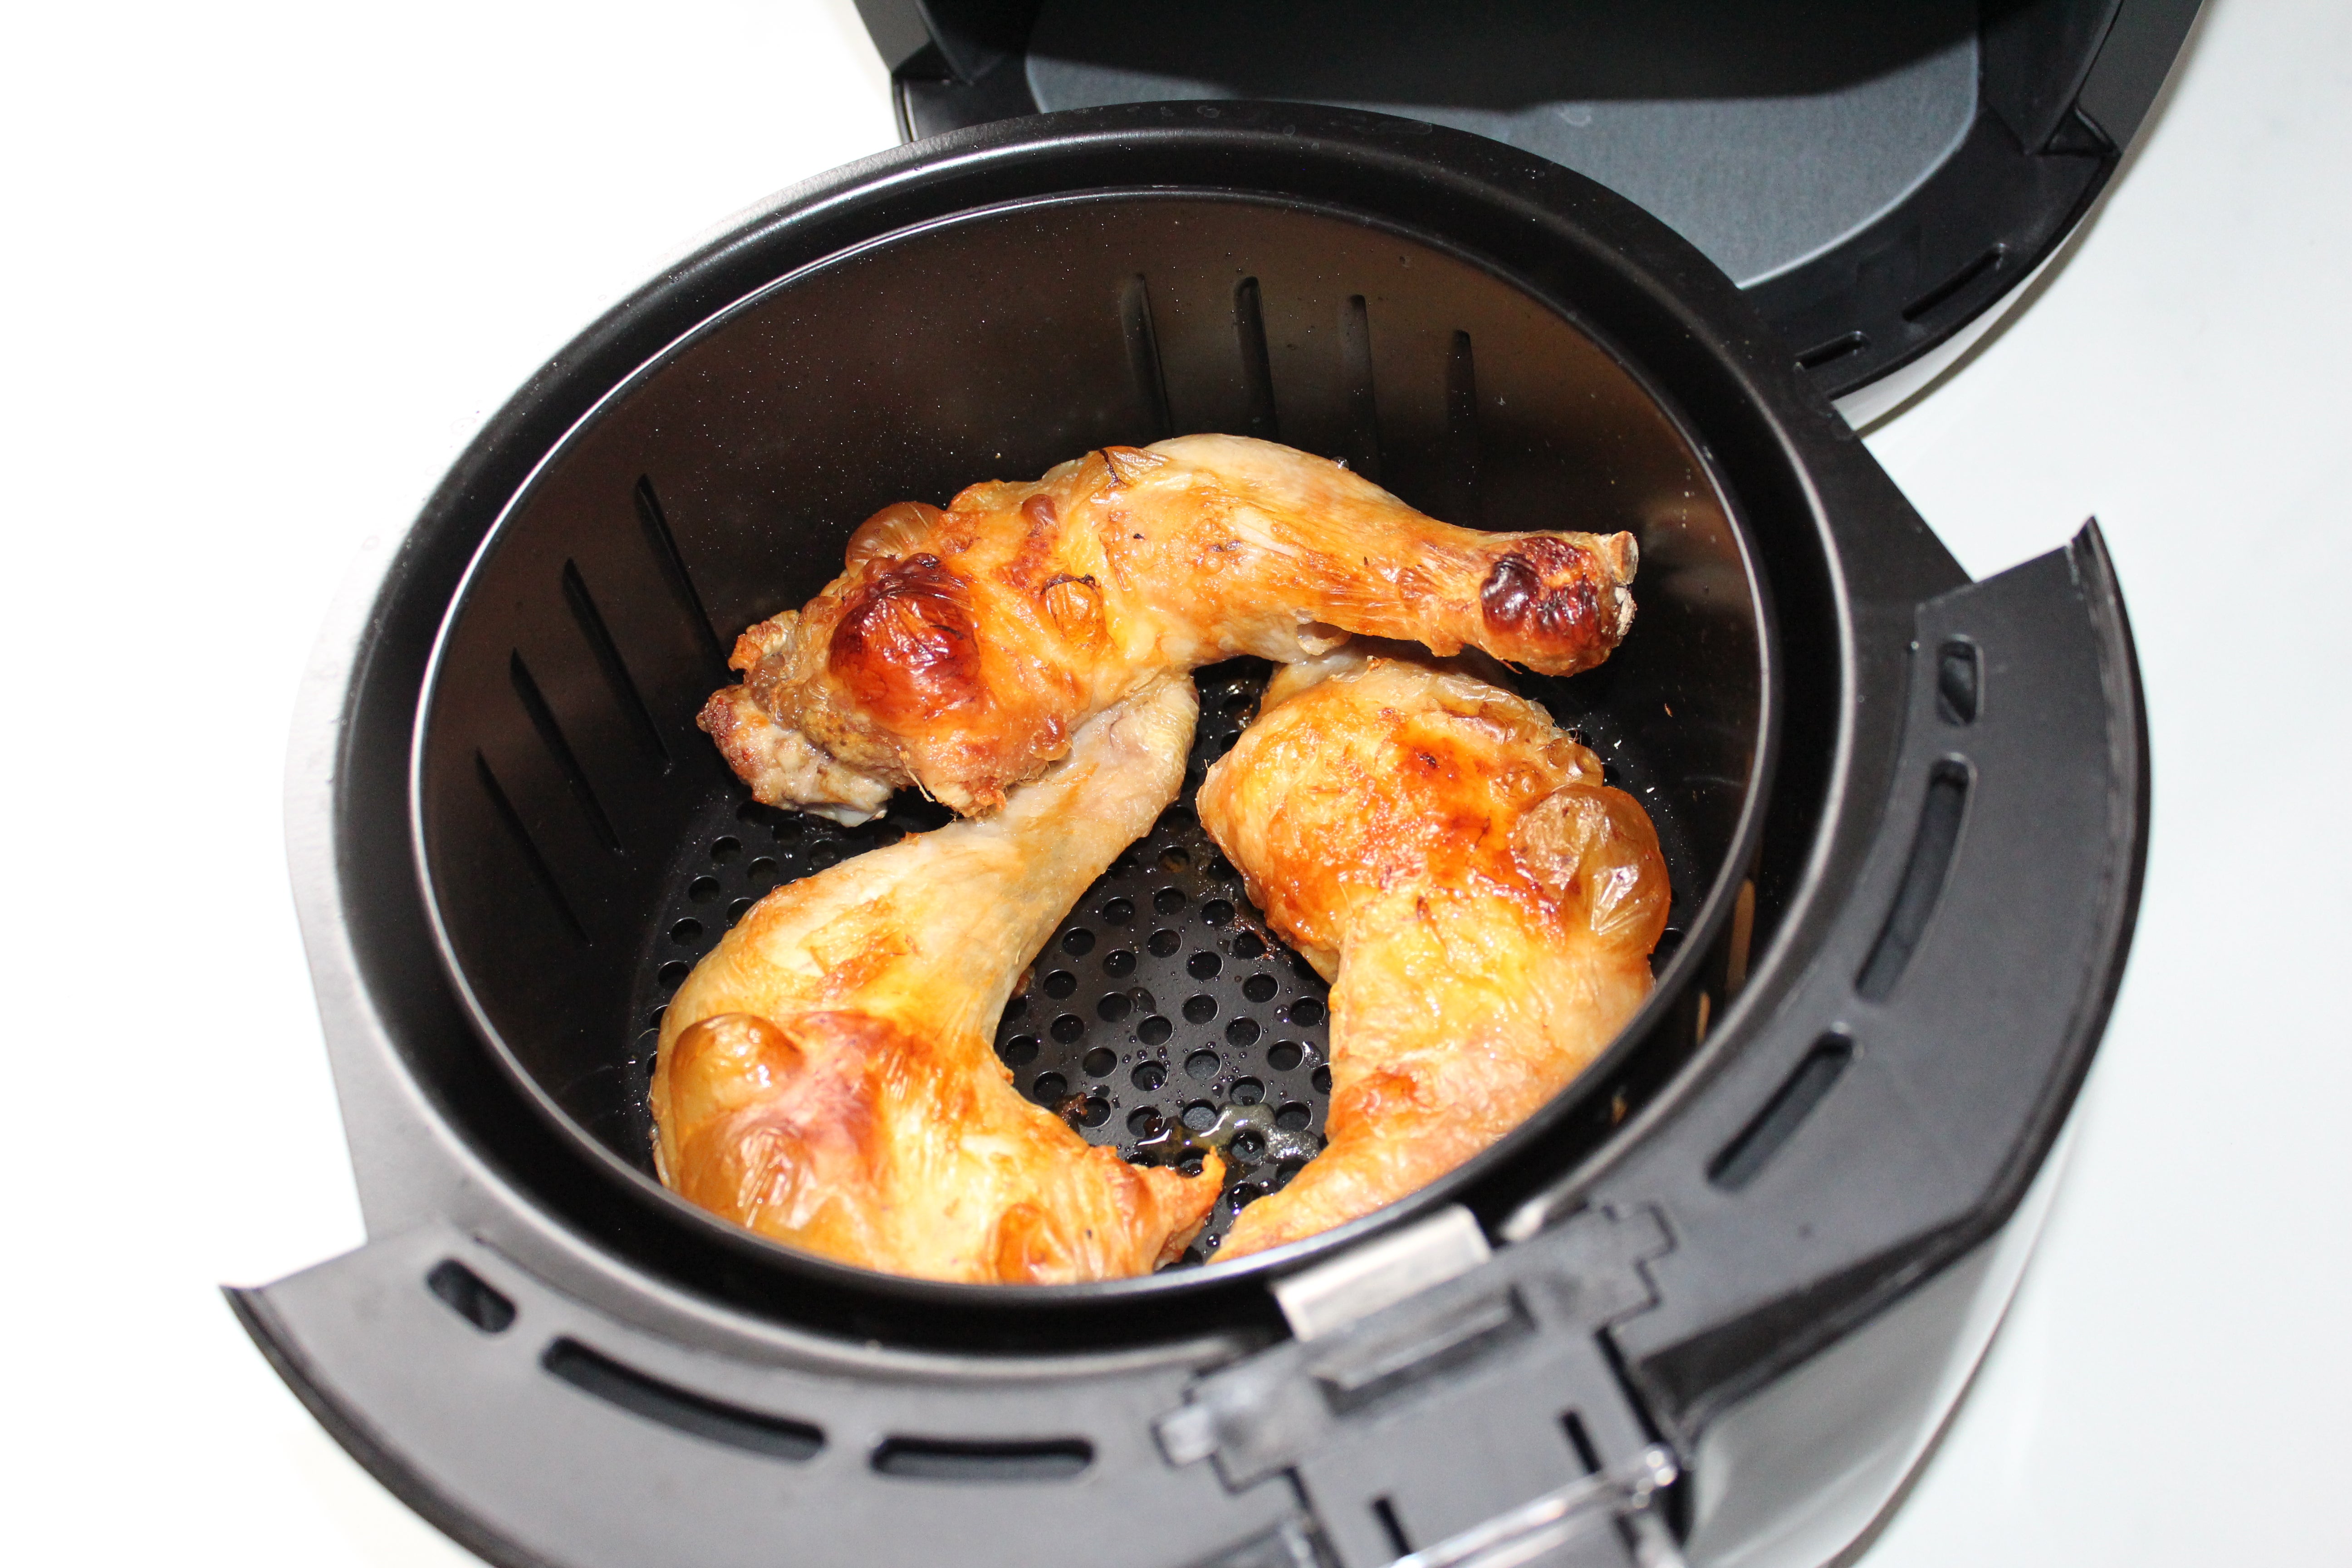 Tower 4.3l Manual Air Fryer ChickenClose up view of fried Chicken legs kept inside a black Tower 4.3L Air Fryer